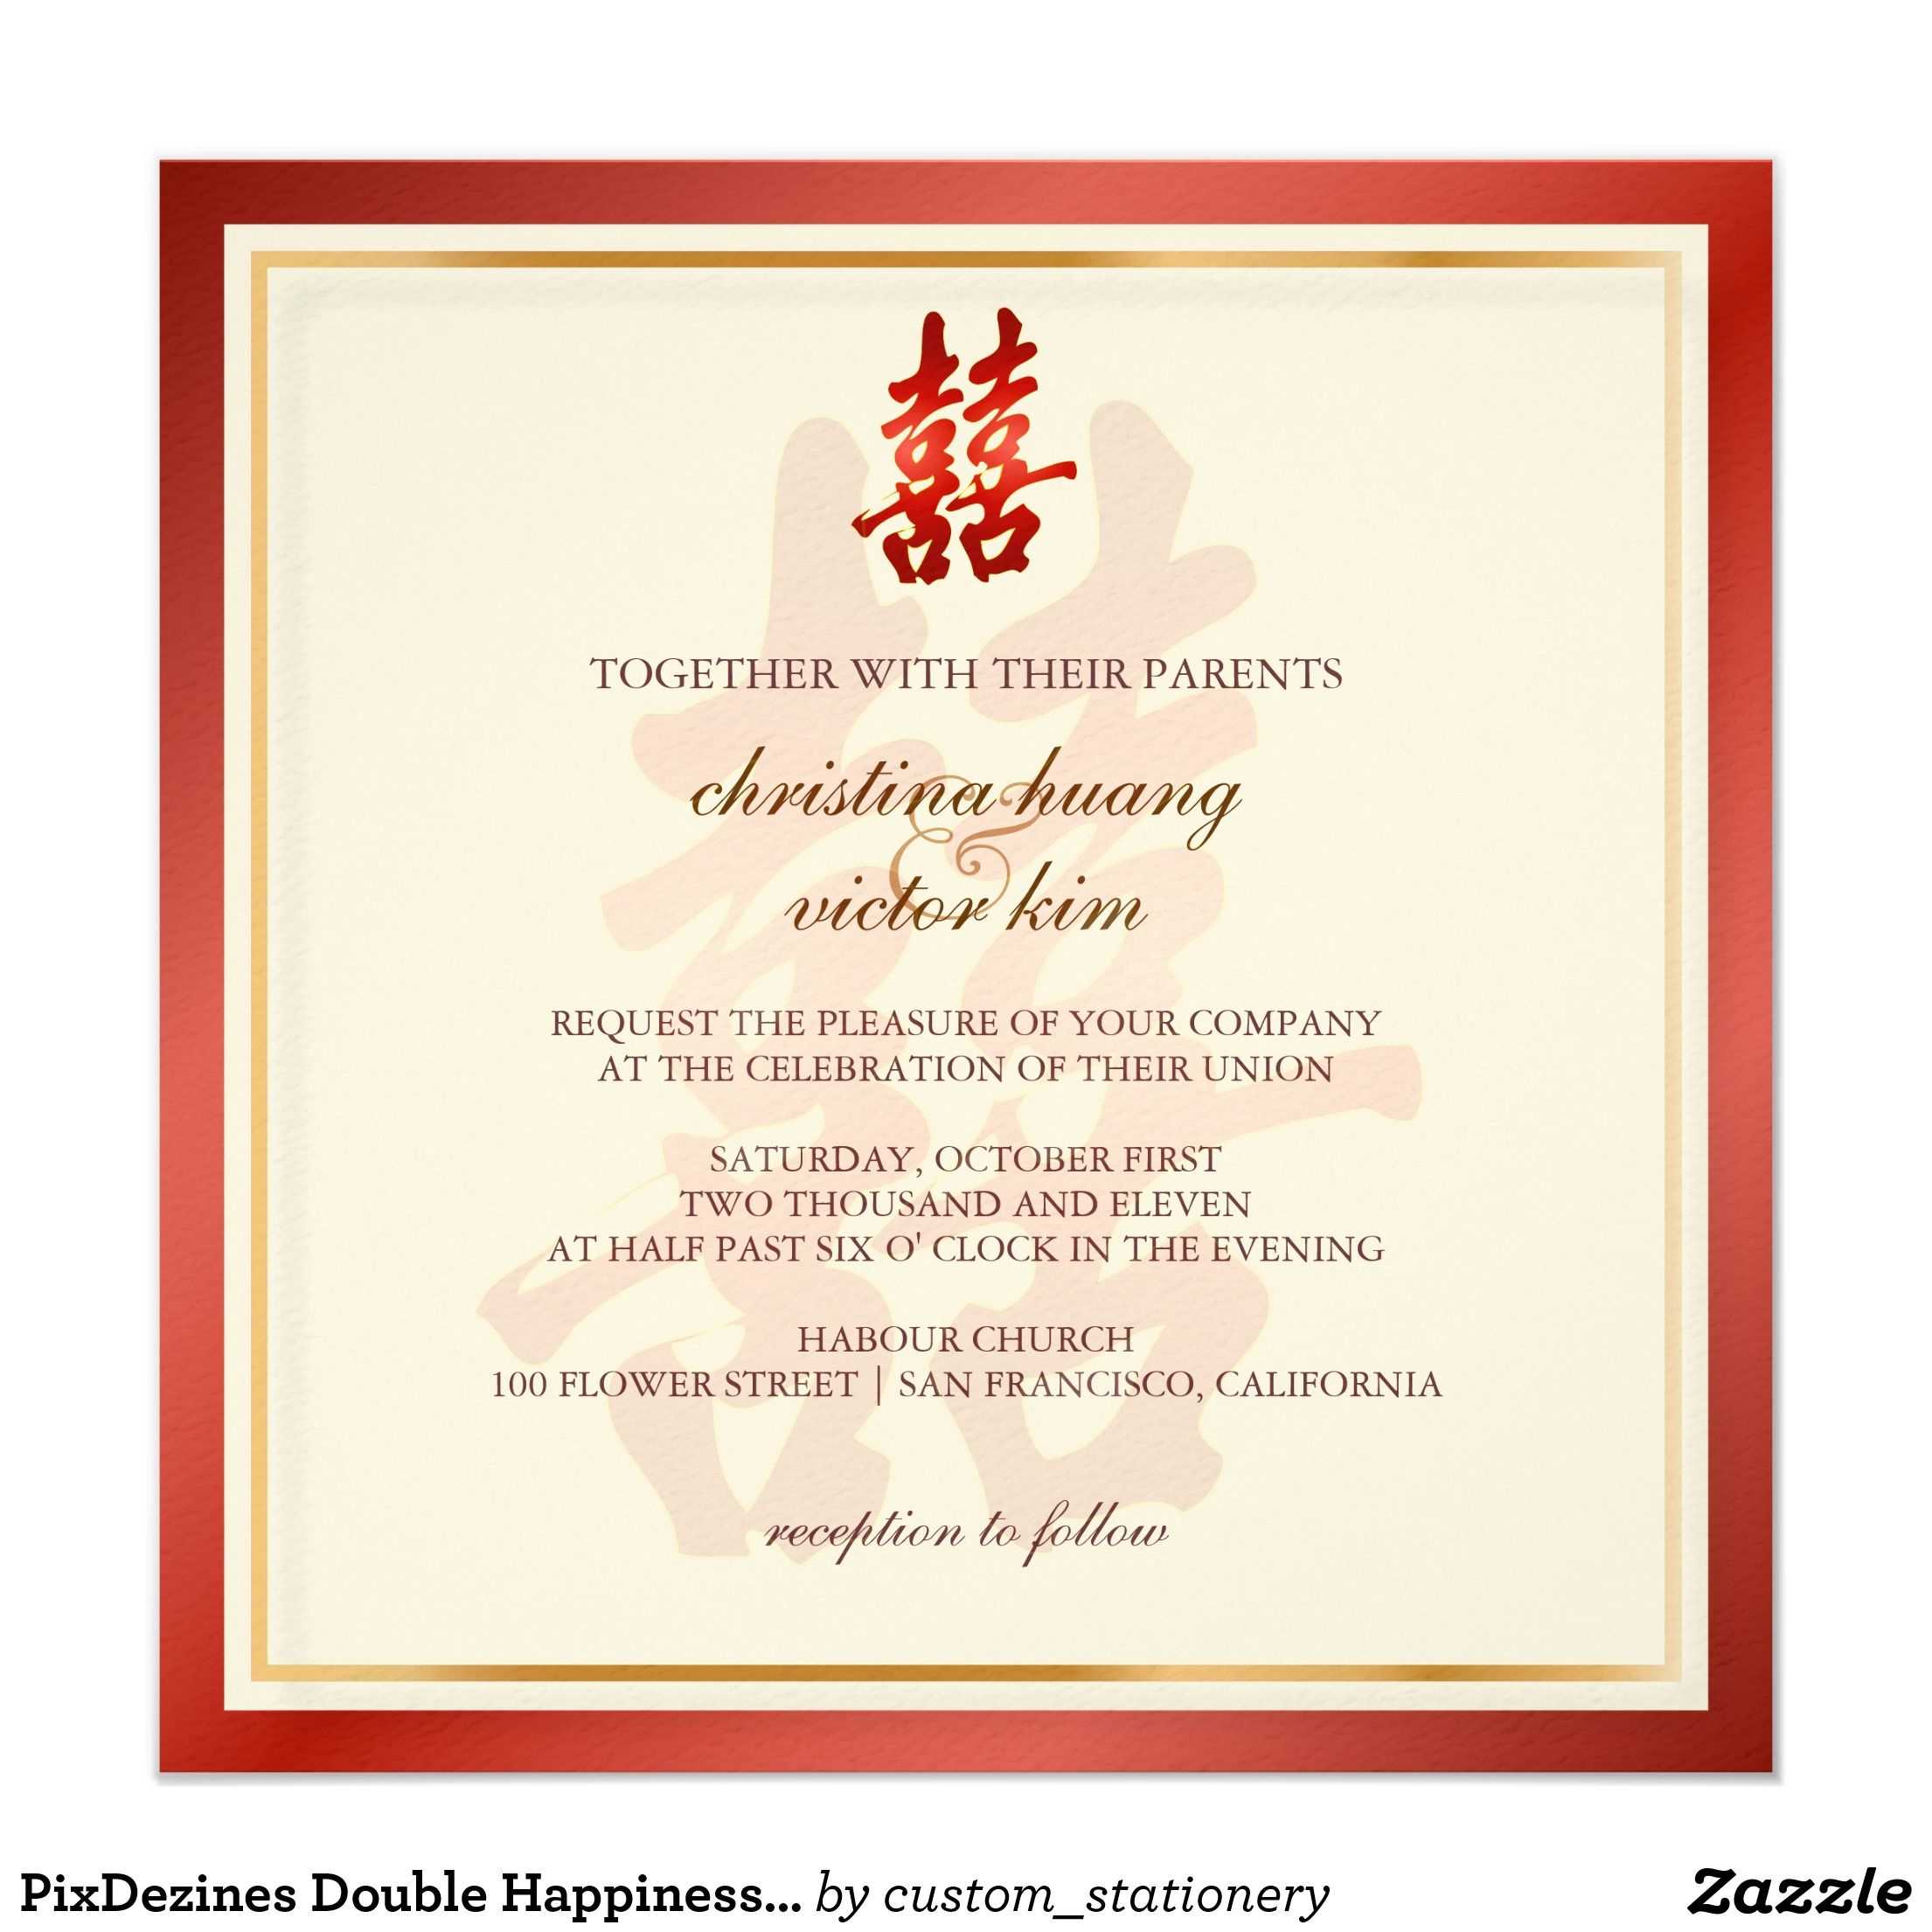 Pixdezines Double Happiness, Chinese Wedding Invitation Throughout Church Wedding Invitation Card Template